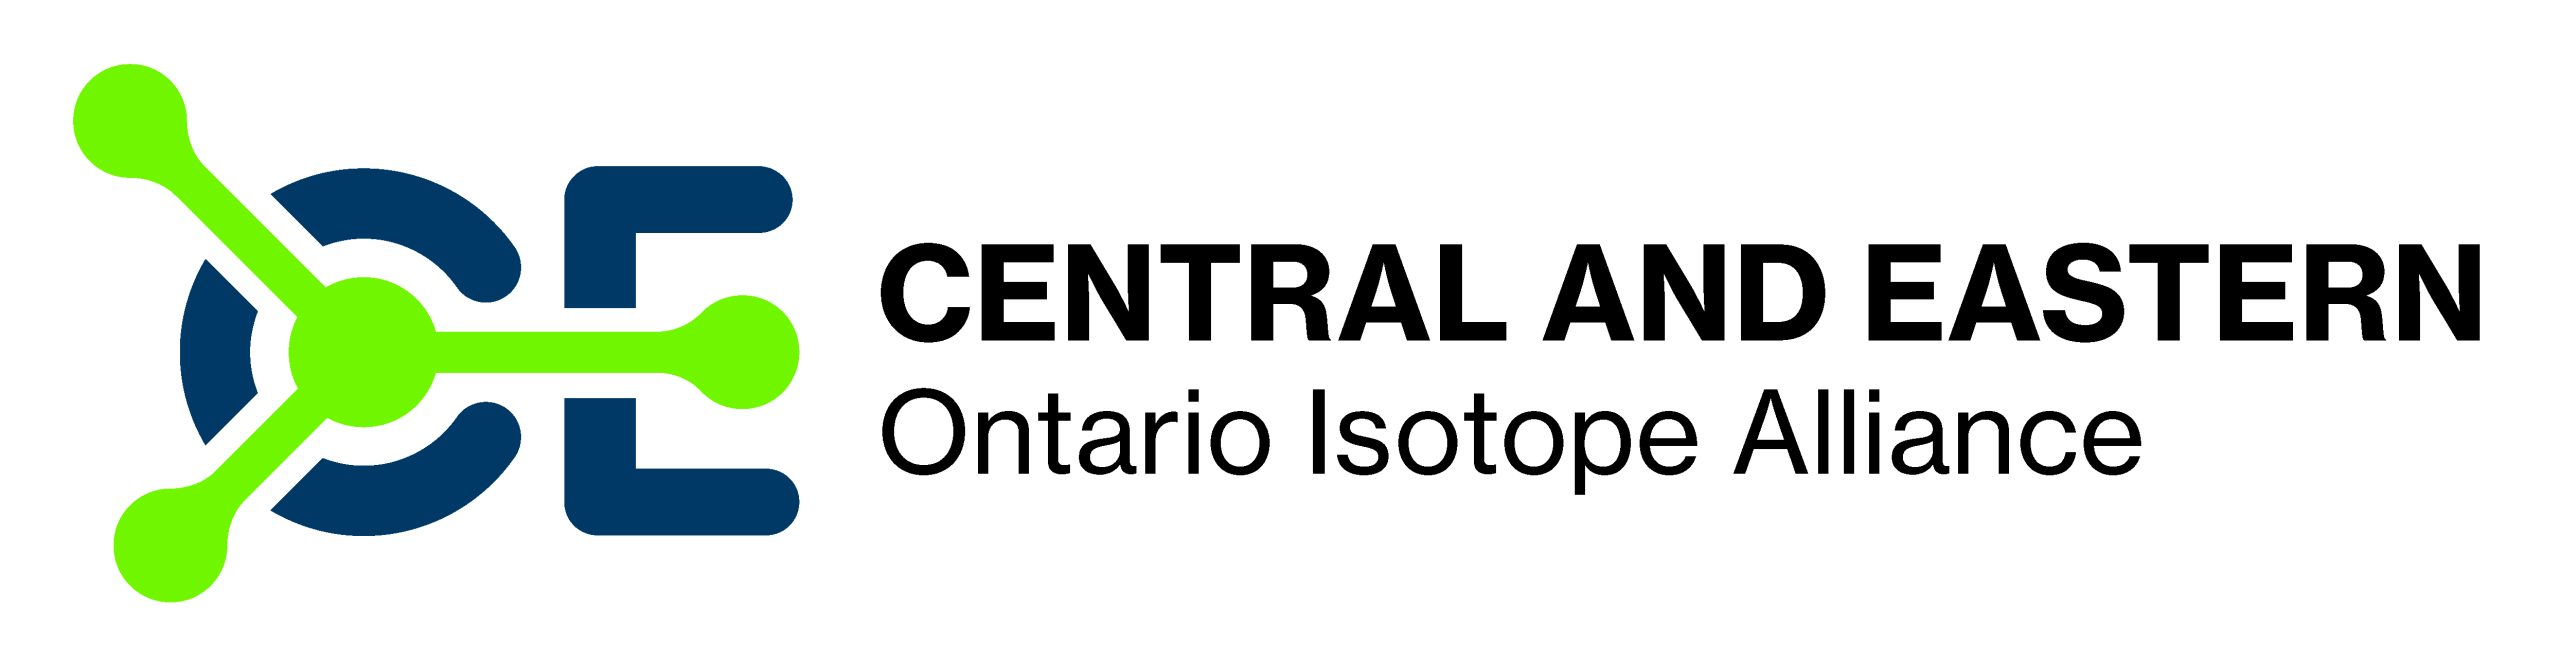 Central and Eastern Ontario Isotope Alliance.